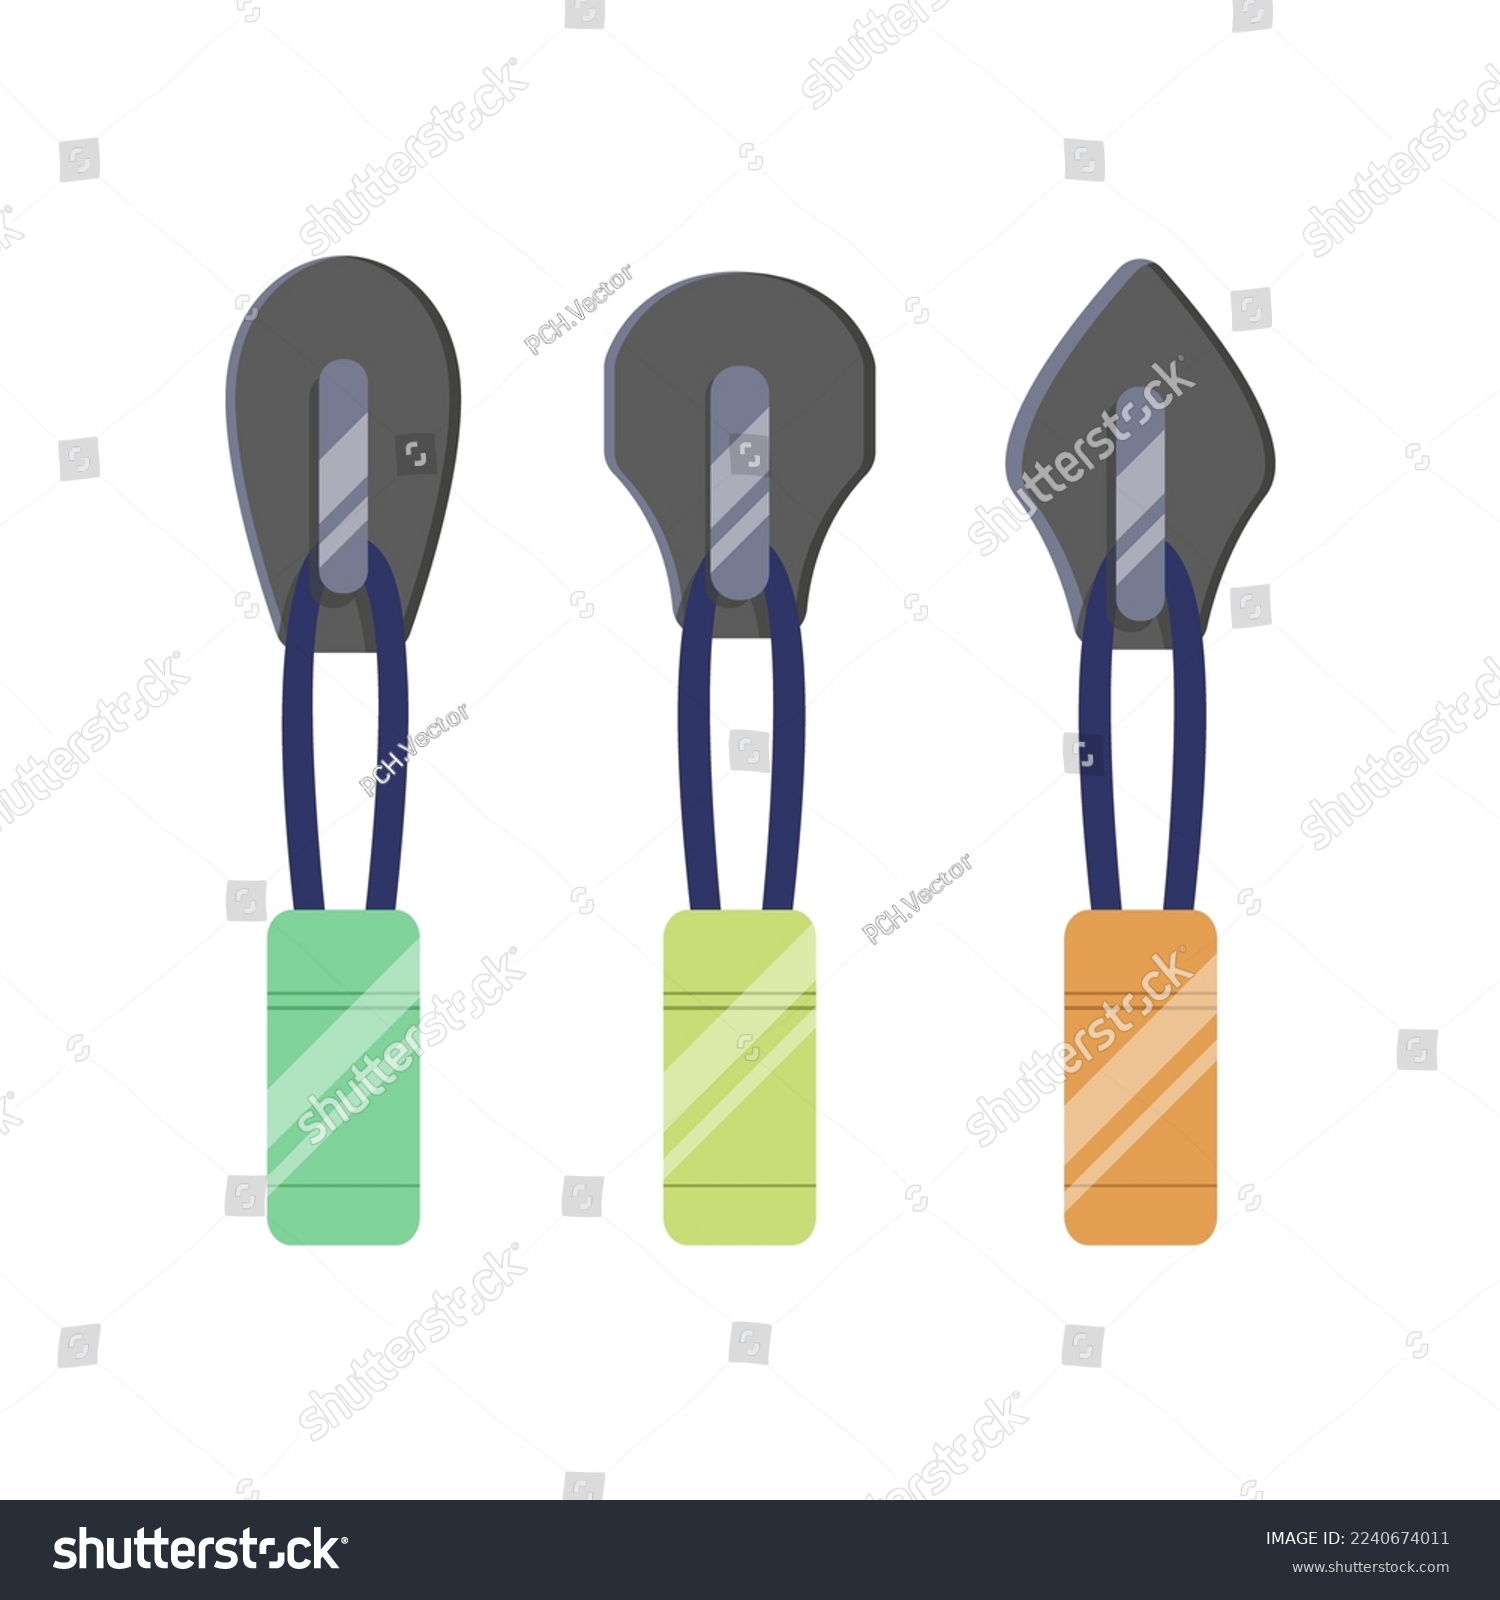 SVG of Modern black and colorful zip sliders for clothes cartoon illustration. Zipper pullers with tassels for sportswear or leather backpacks. Fashion, metal accessories concept svg